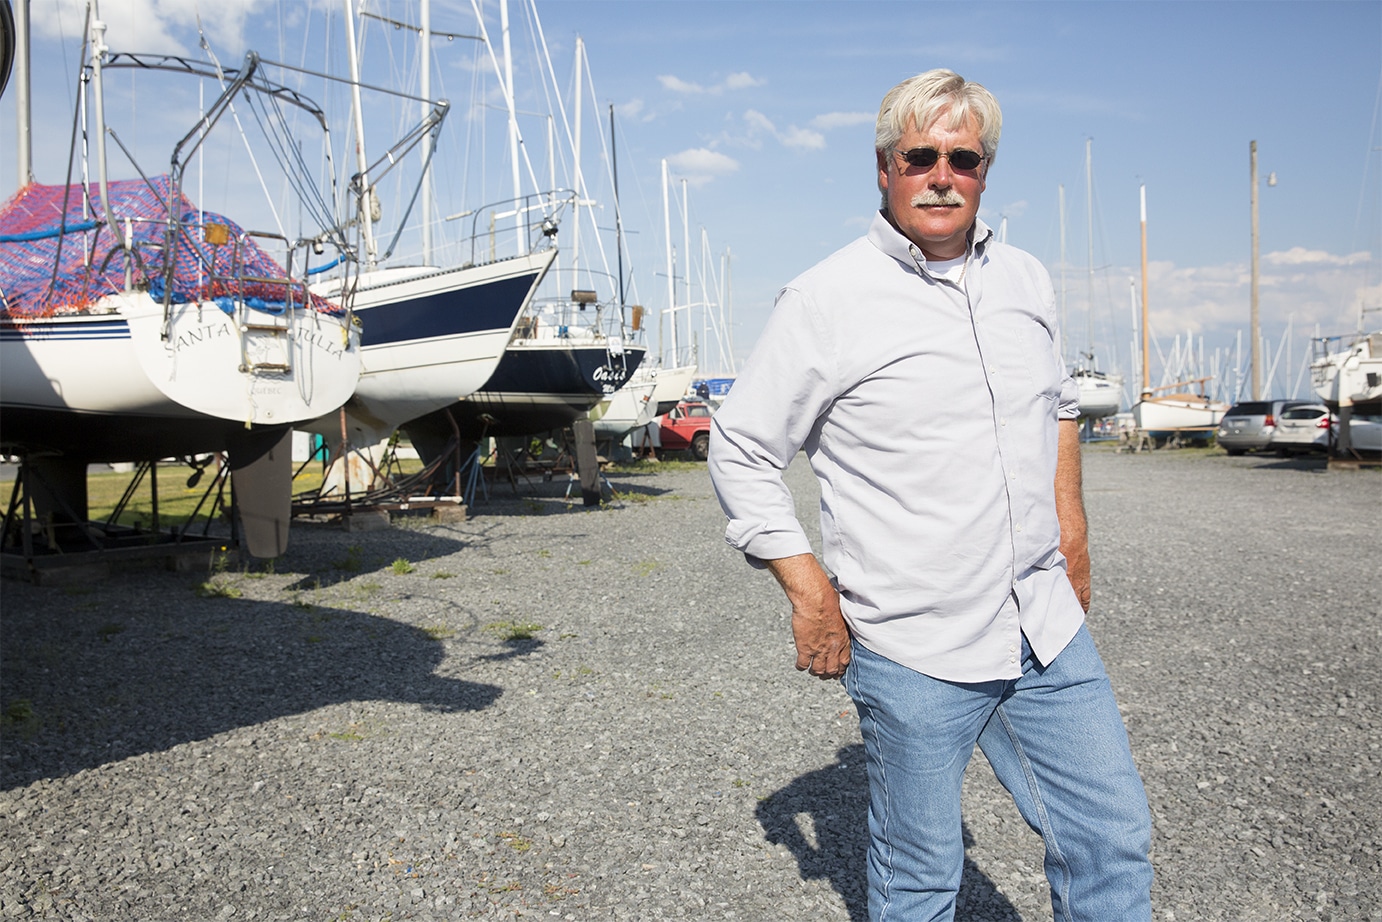 Mickey Maynard, possibly the most sought after fisherman on the lake, spent some time with us sharing lake stories down in the Plattsburgh Marina.